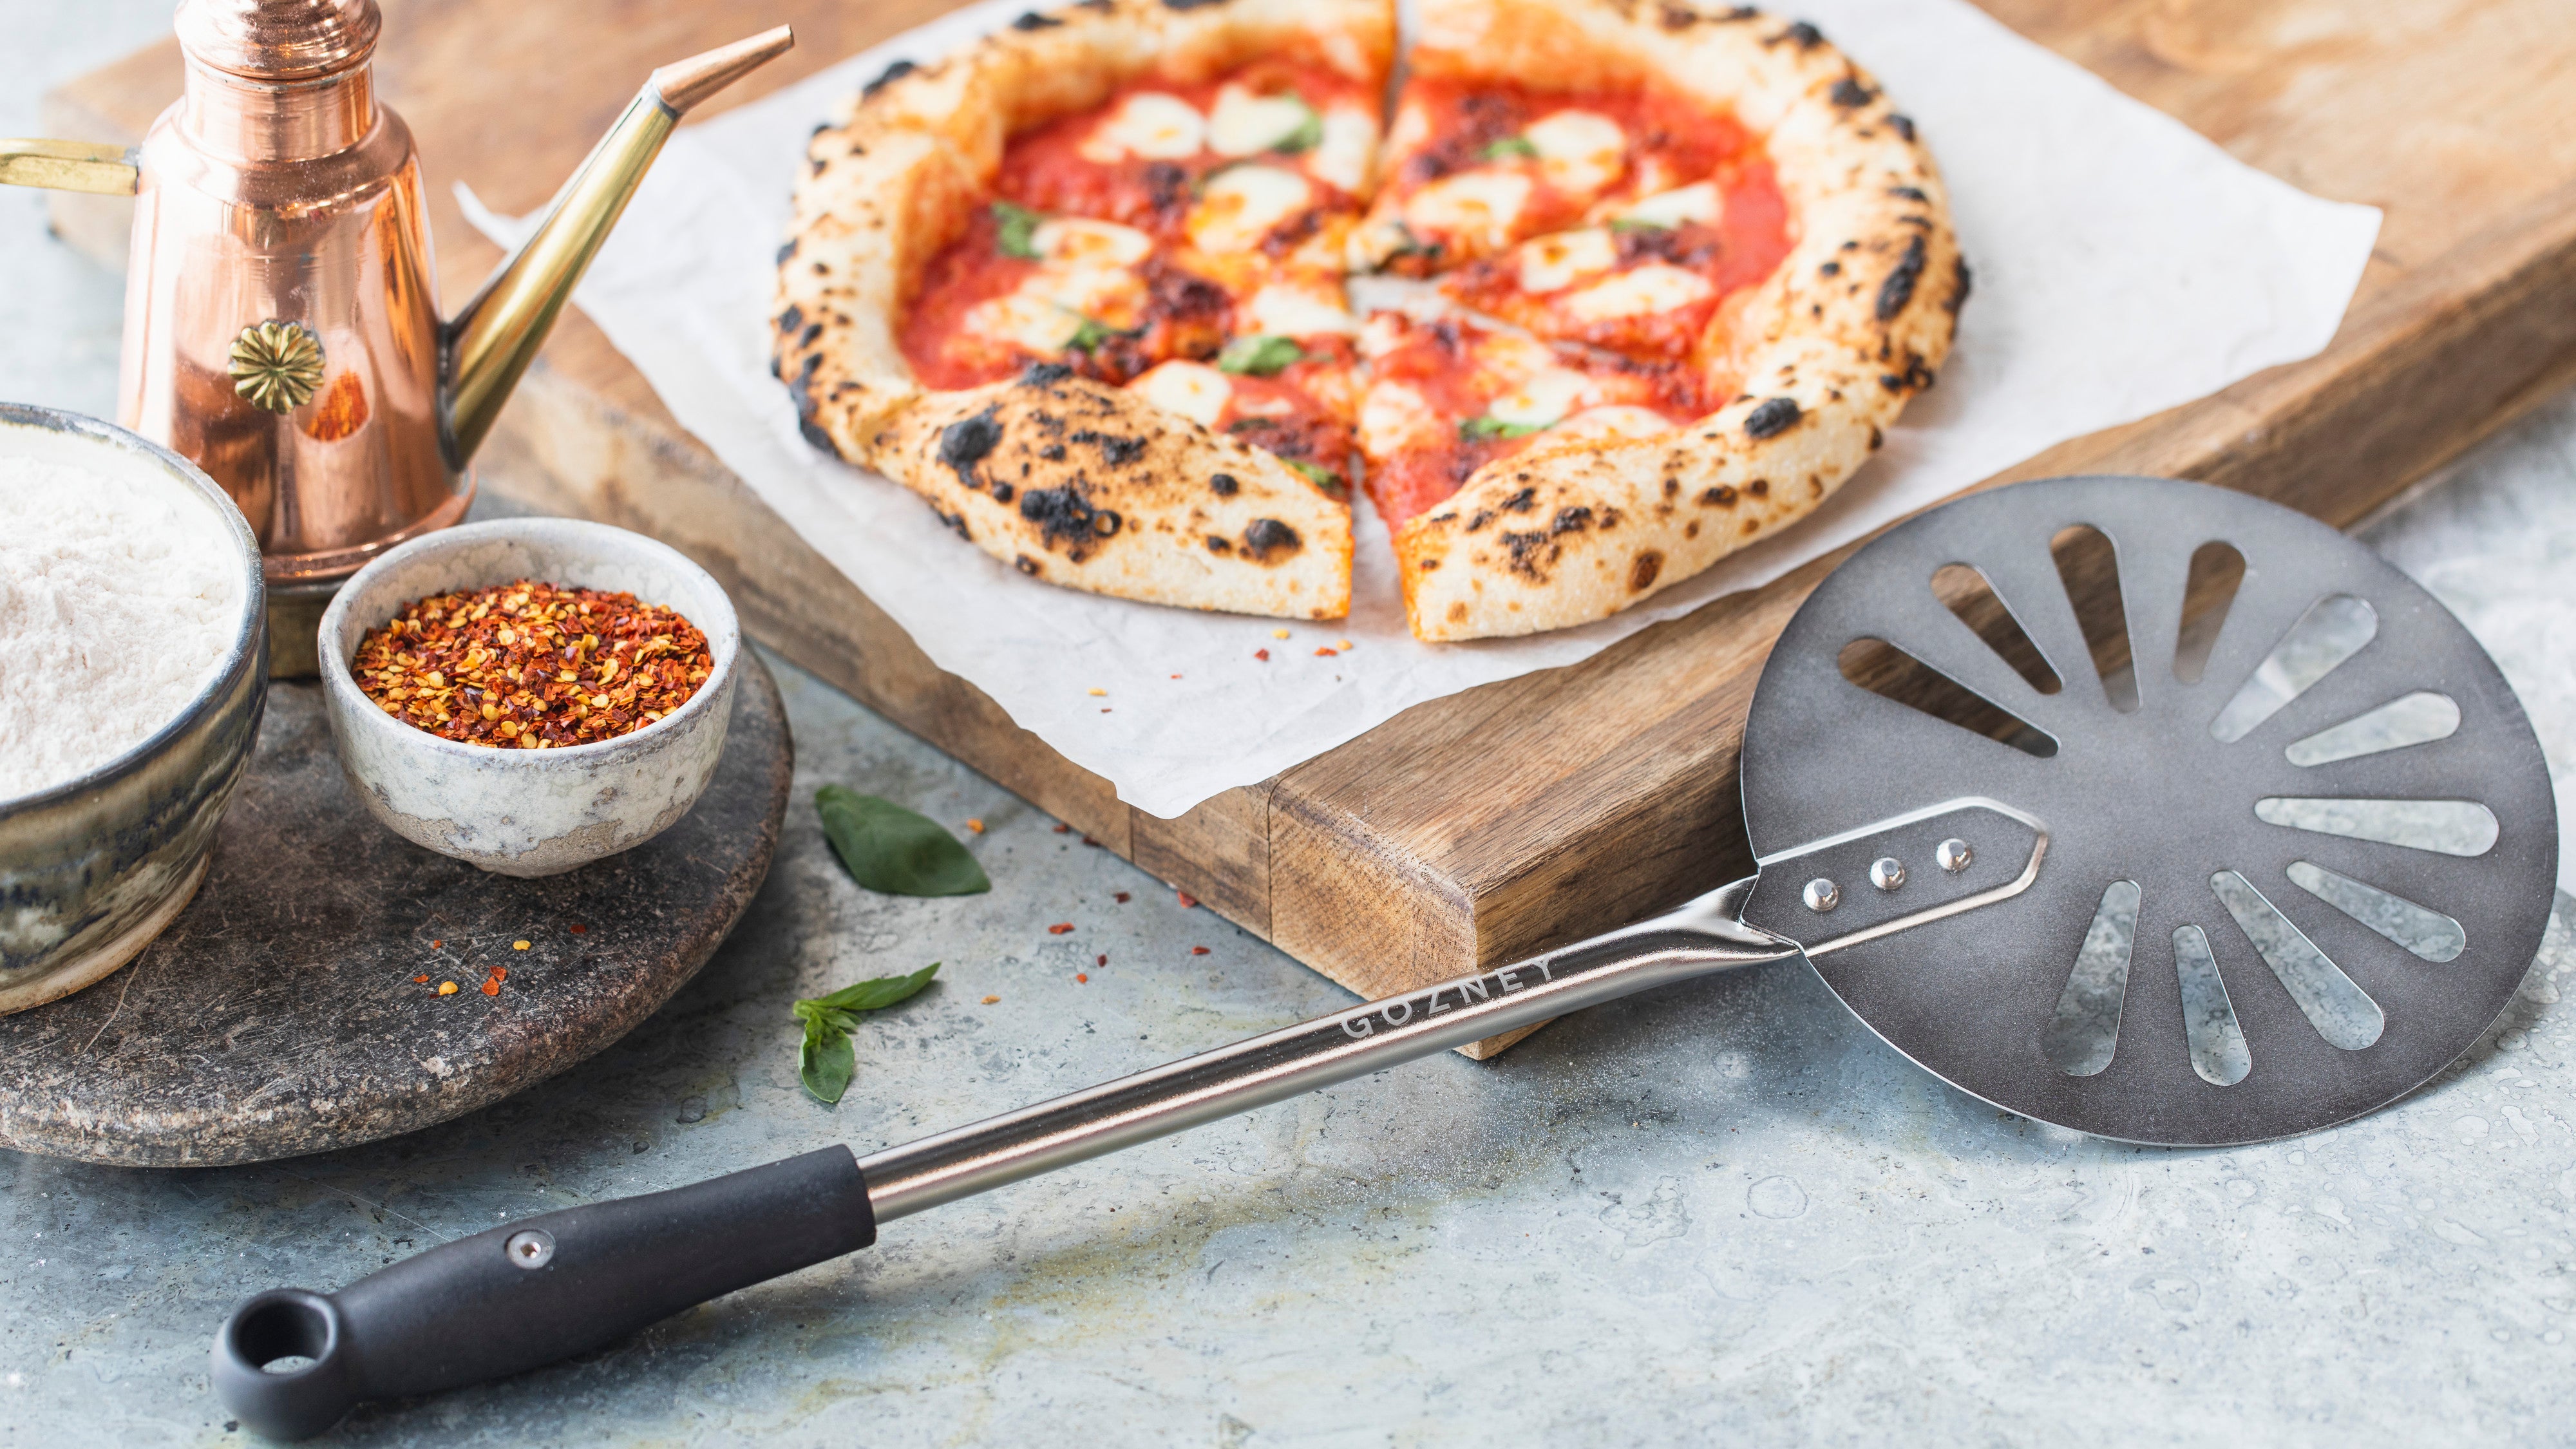 Mastering the Art of Pizza: Perforated vs. Non-Perforated Pans